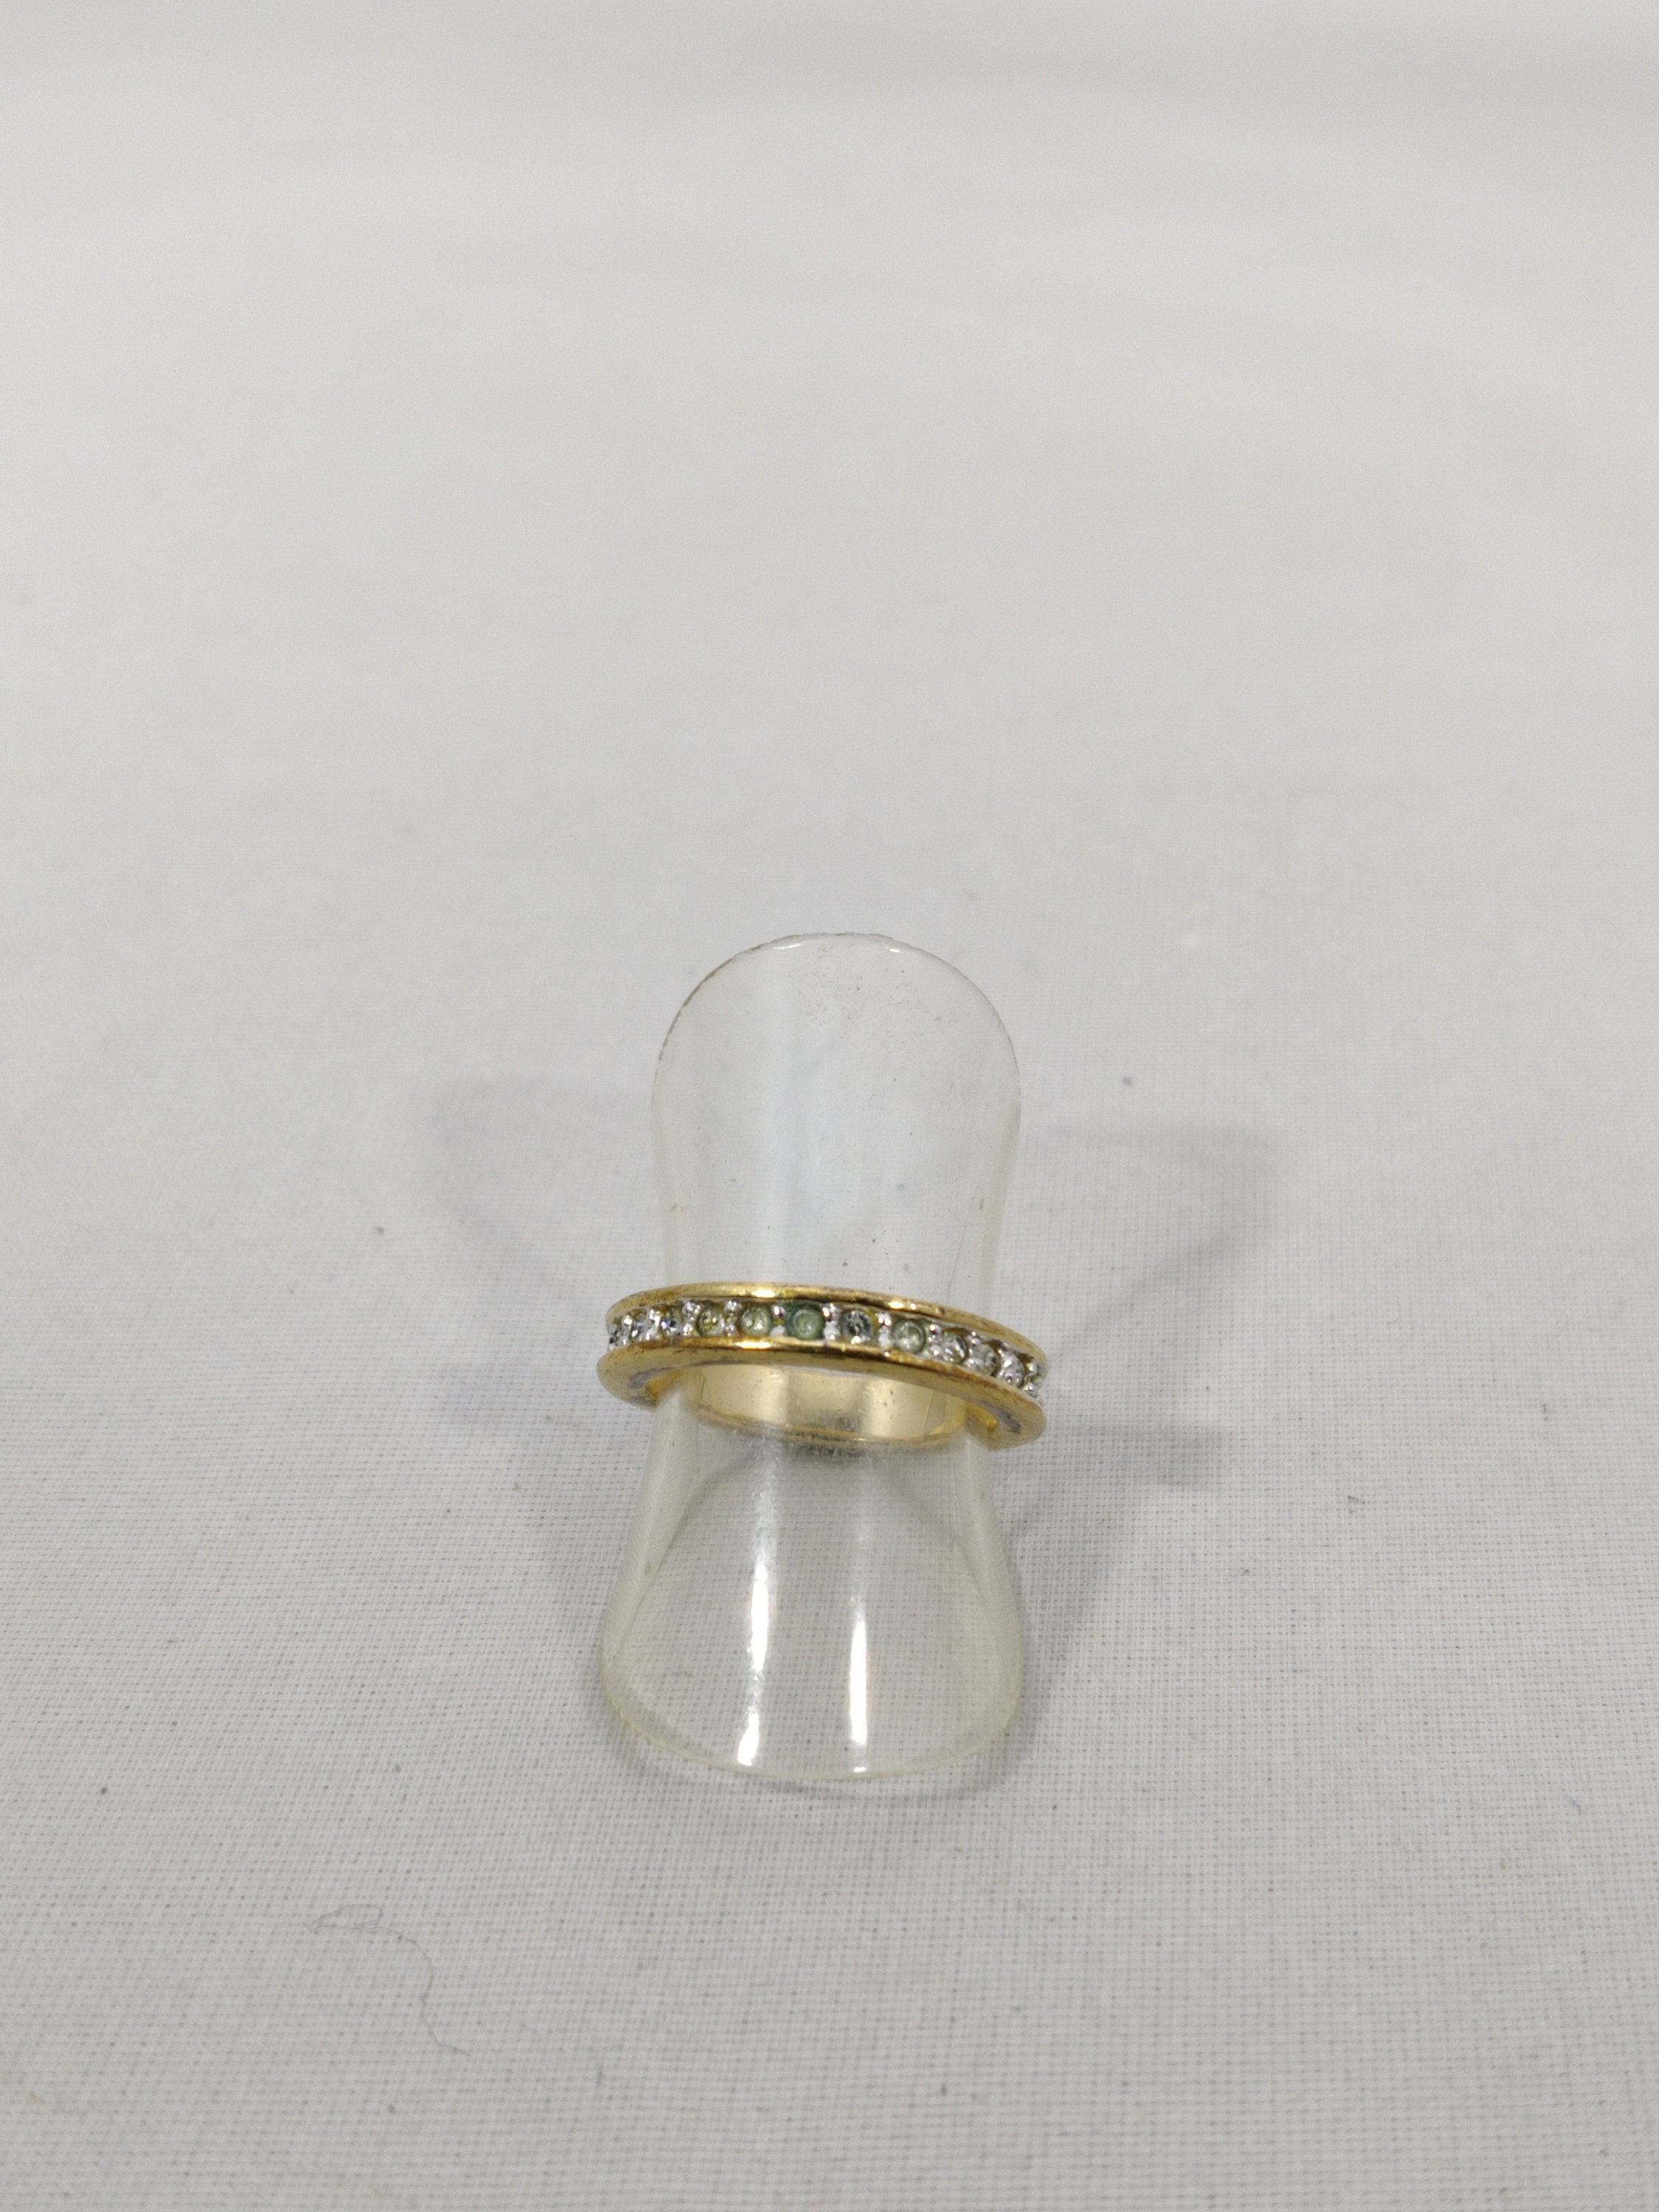 Signed M&S Vintage Ring in Zirconium Oxide and Gold Metal -  Canada